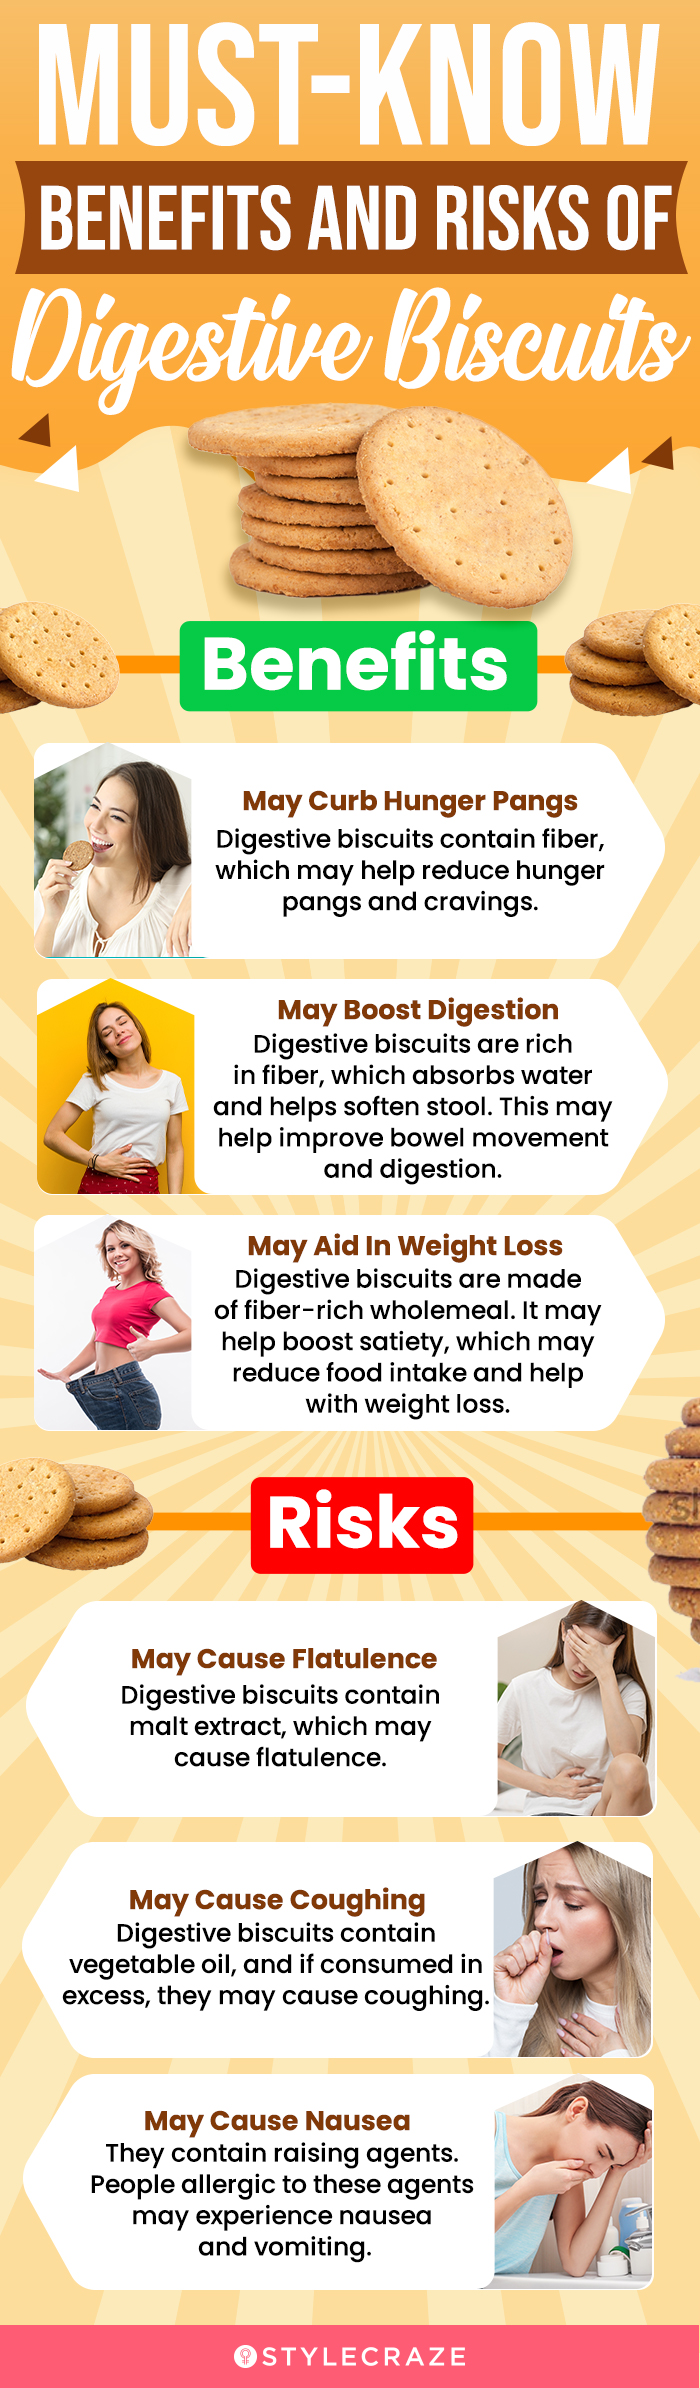 must know benefits and risks of digestive biscuits (infographic)